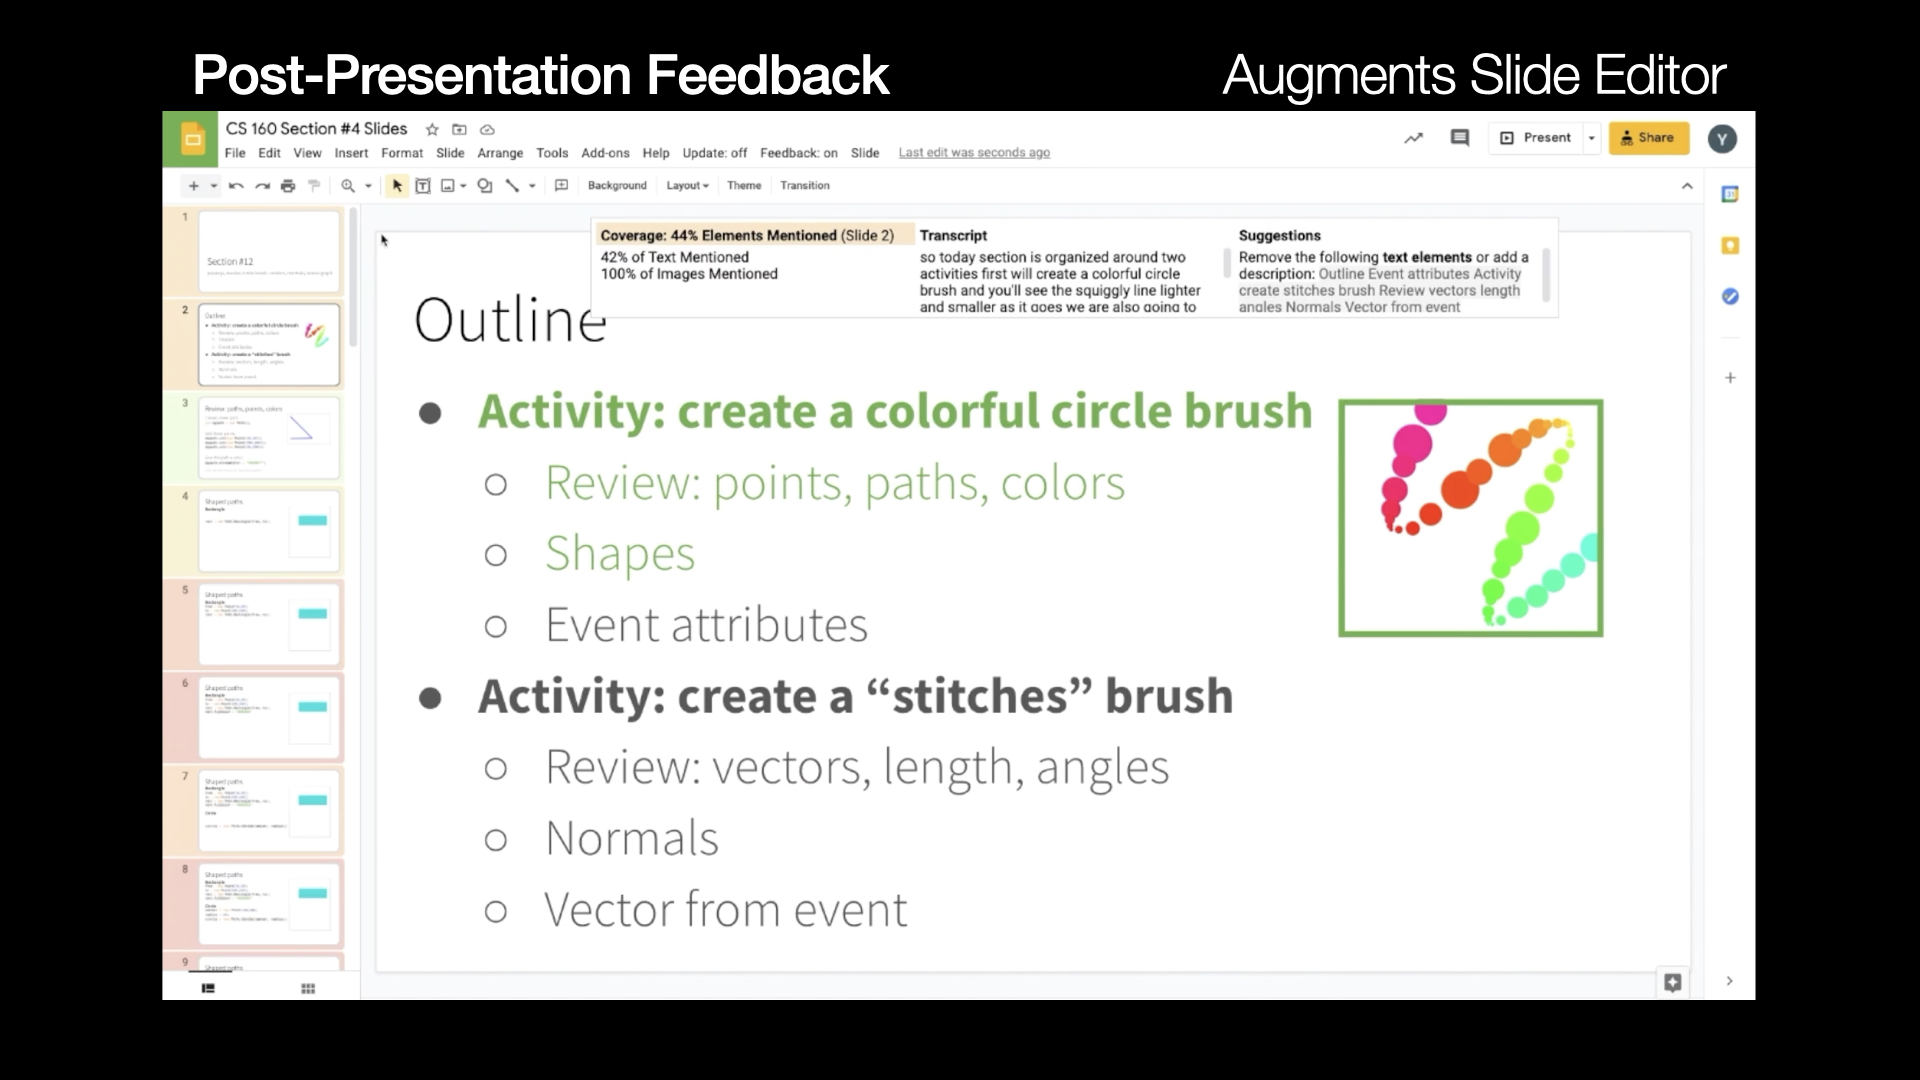 This is the slide that shows the demo clip of our post-presentation feedback interface. The demo example is still the same interface and contents as shown in previous slides.  In the video, the speakers removed undescribed bullet text item “Activity: create a stiches brush” along with its three subitems “Review: vector, length, angles”, “Normals” and “Vector from event”. The coverage percentage was changed from 44% to 79% after removing the undescribed contents.